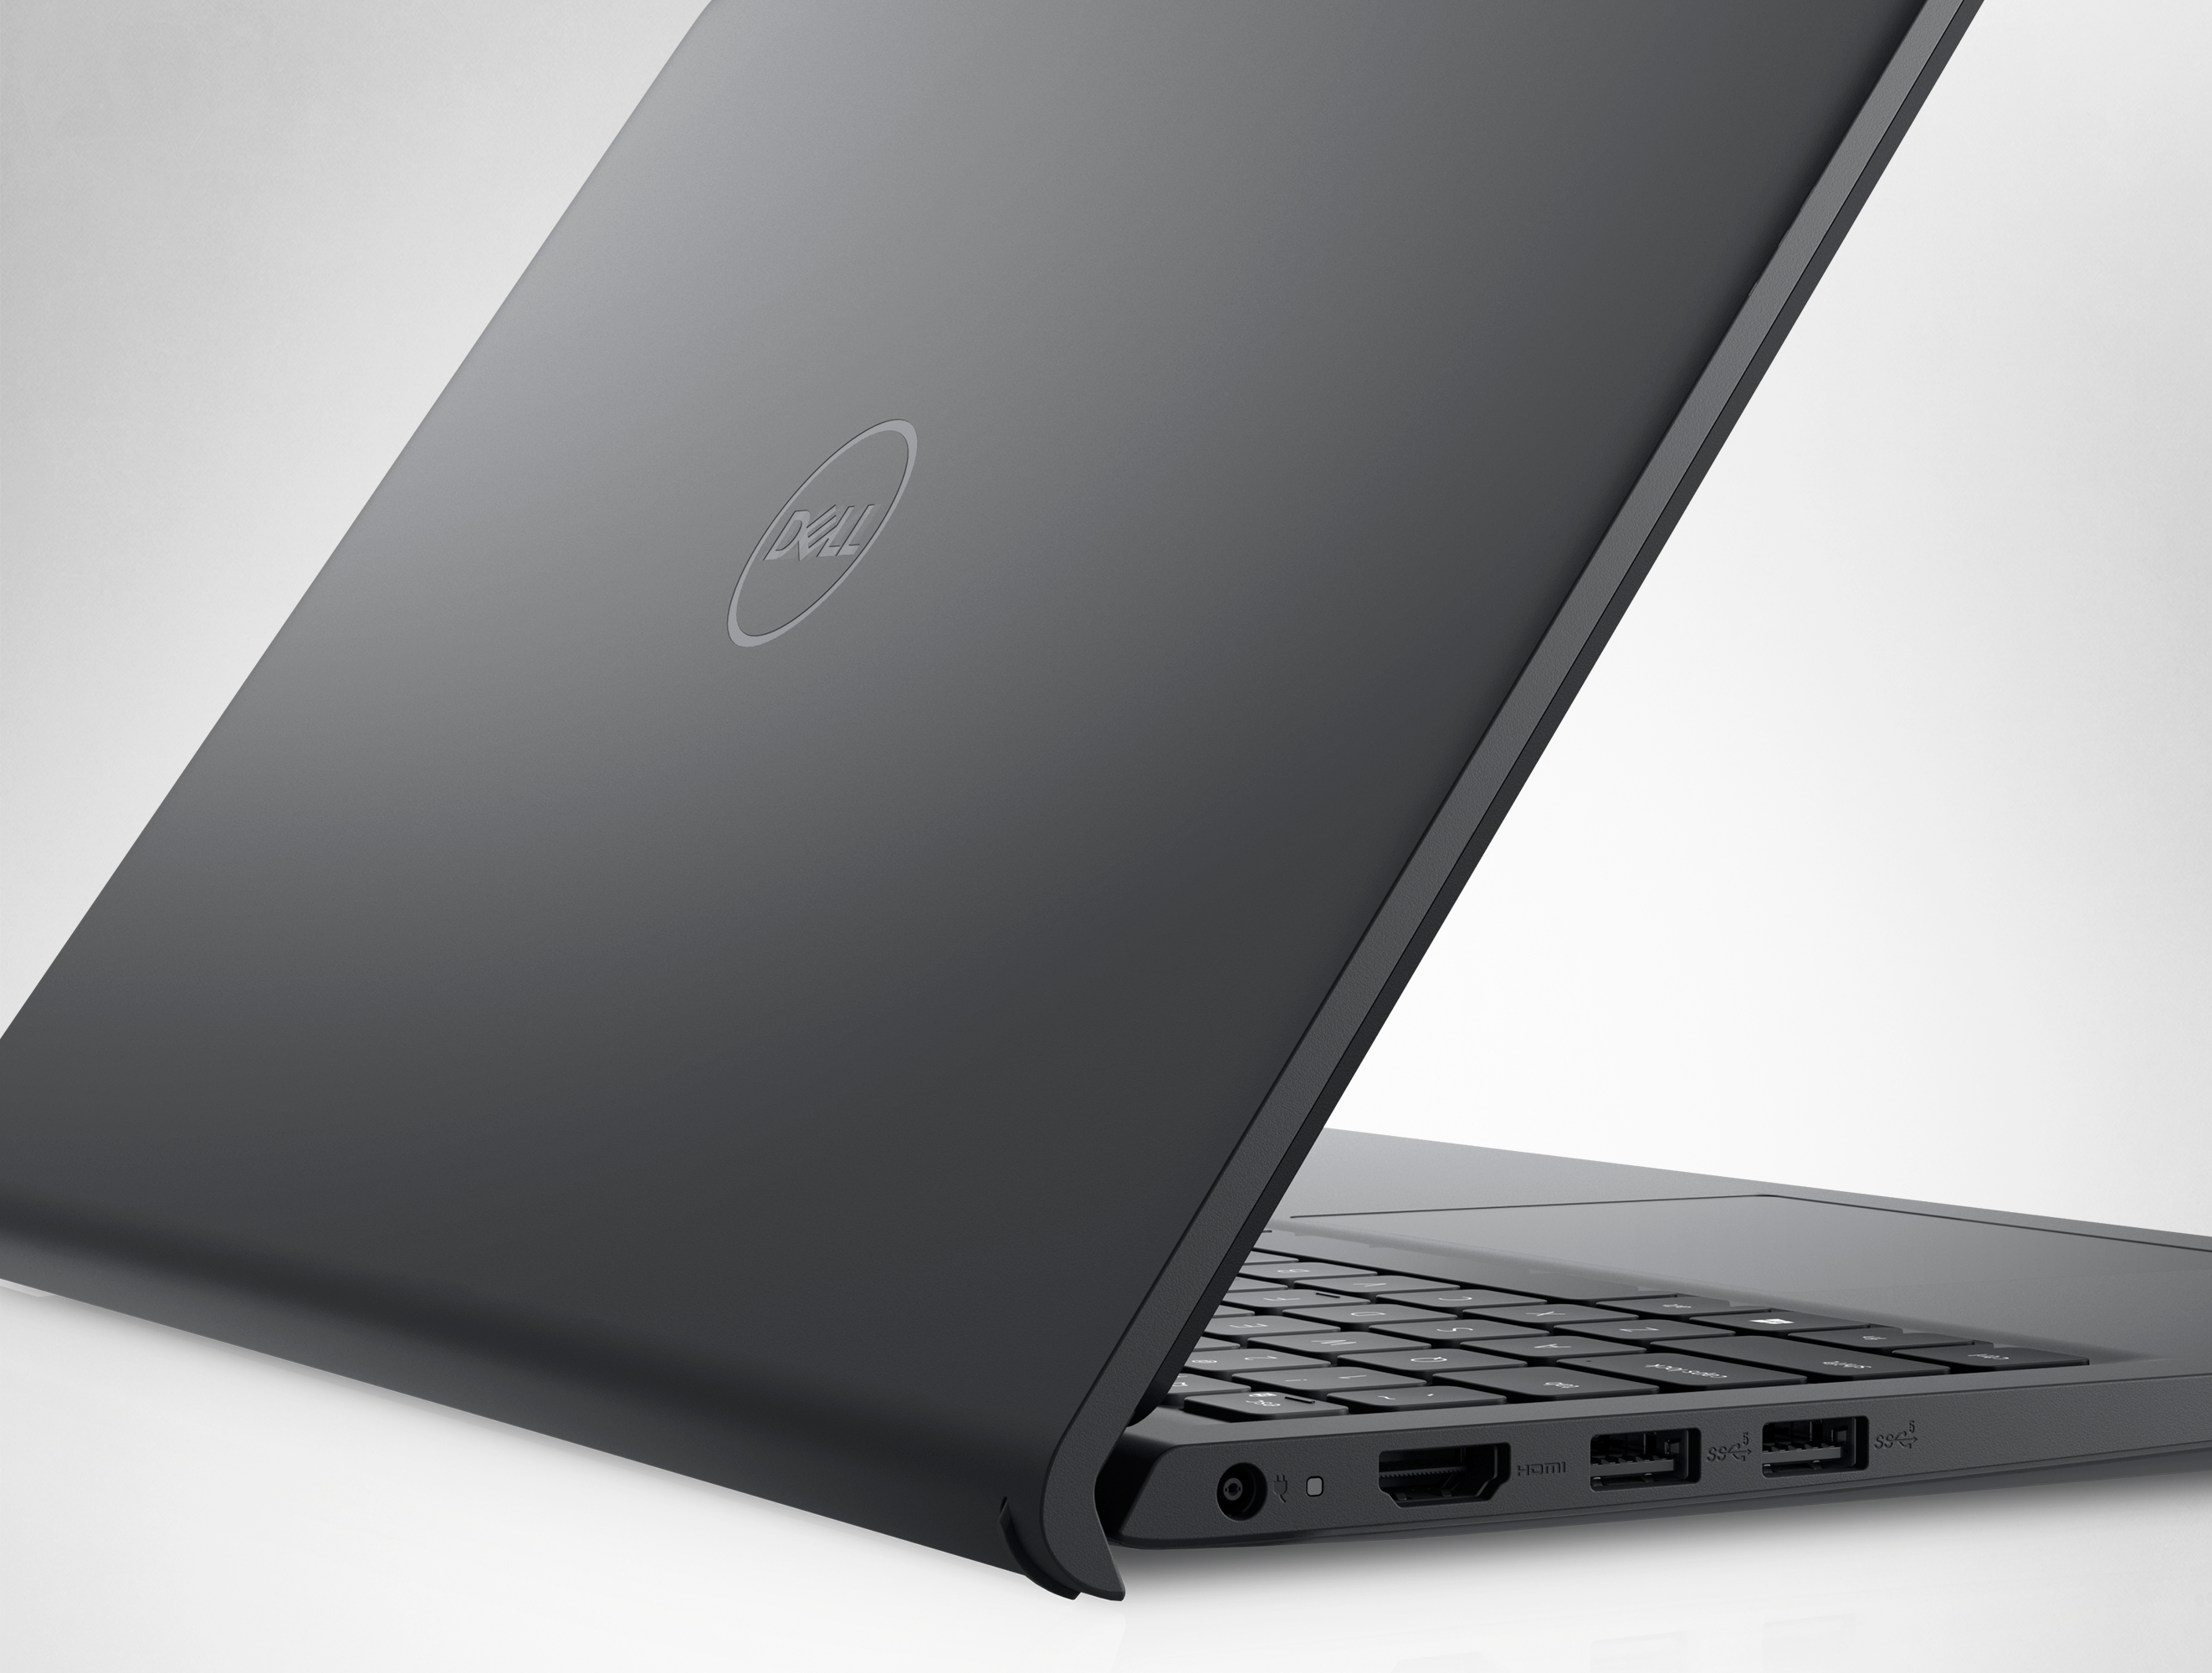 Picture of an opened Dell Inspiron 15 3520 Laptop with its back and Dell’s logo visible. 